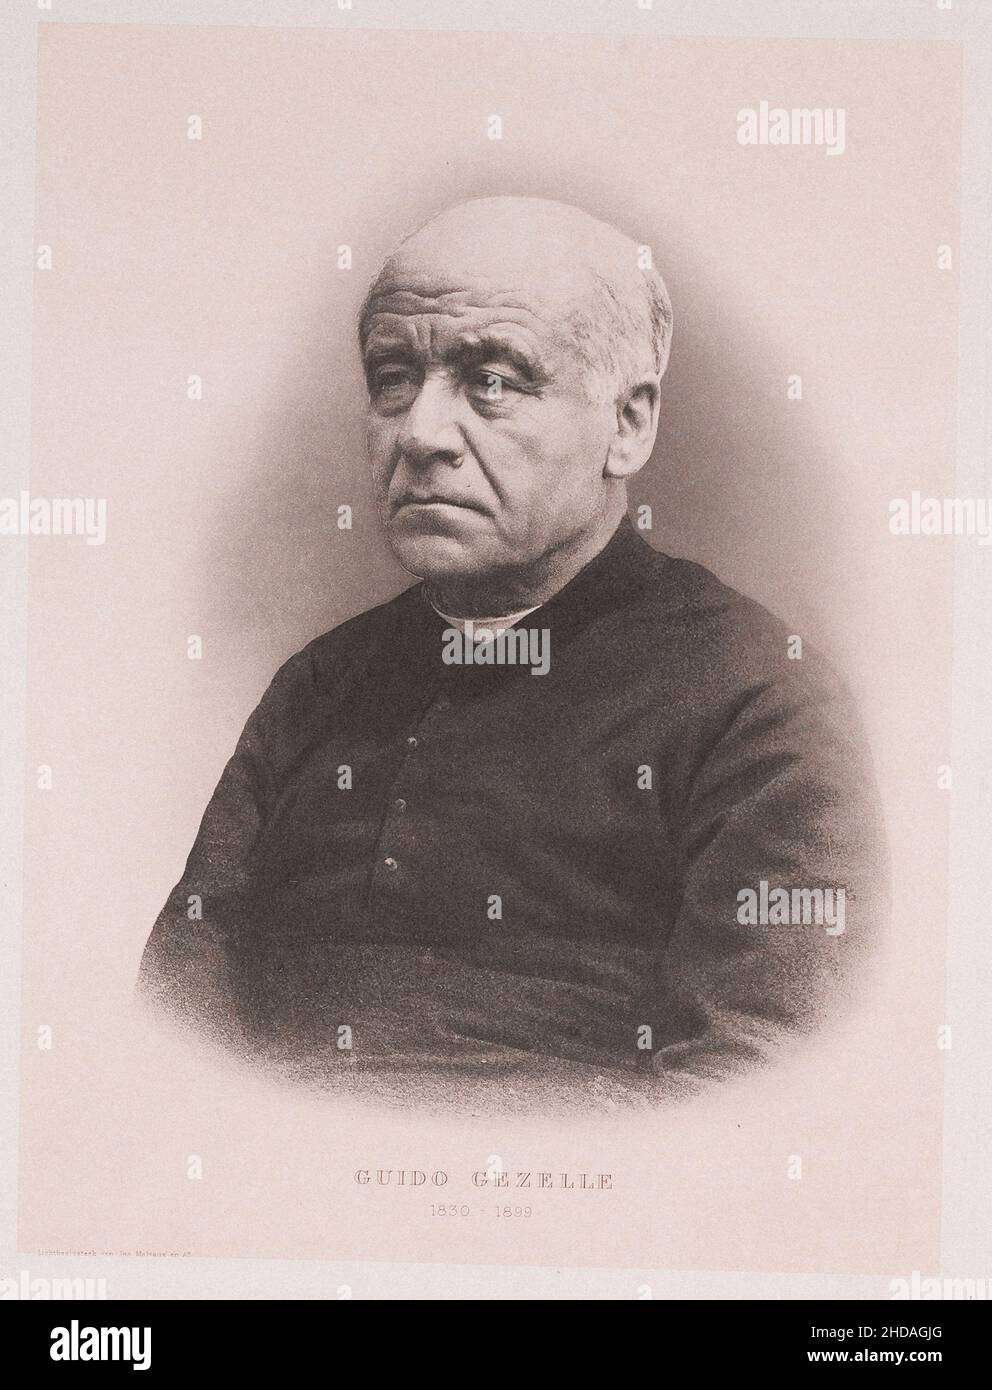 Portrait of Guido Gezelle.  Guido Pieter Theodorus Josephus Gezelle (1830 – 1899) was an influential writer and poet and a Roman Catholic priest from Stock Photo